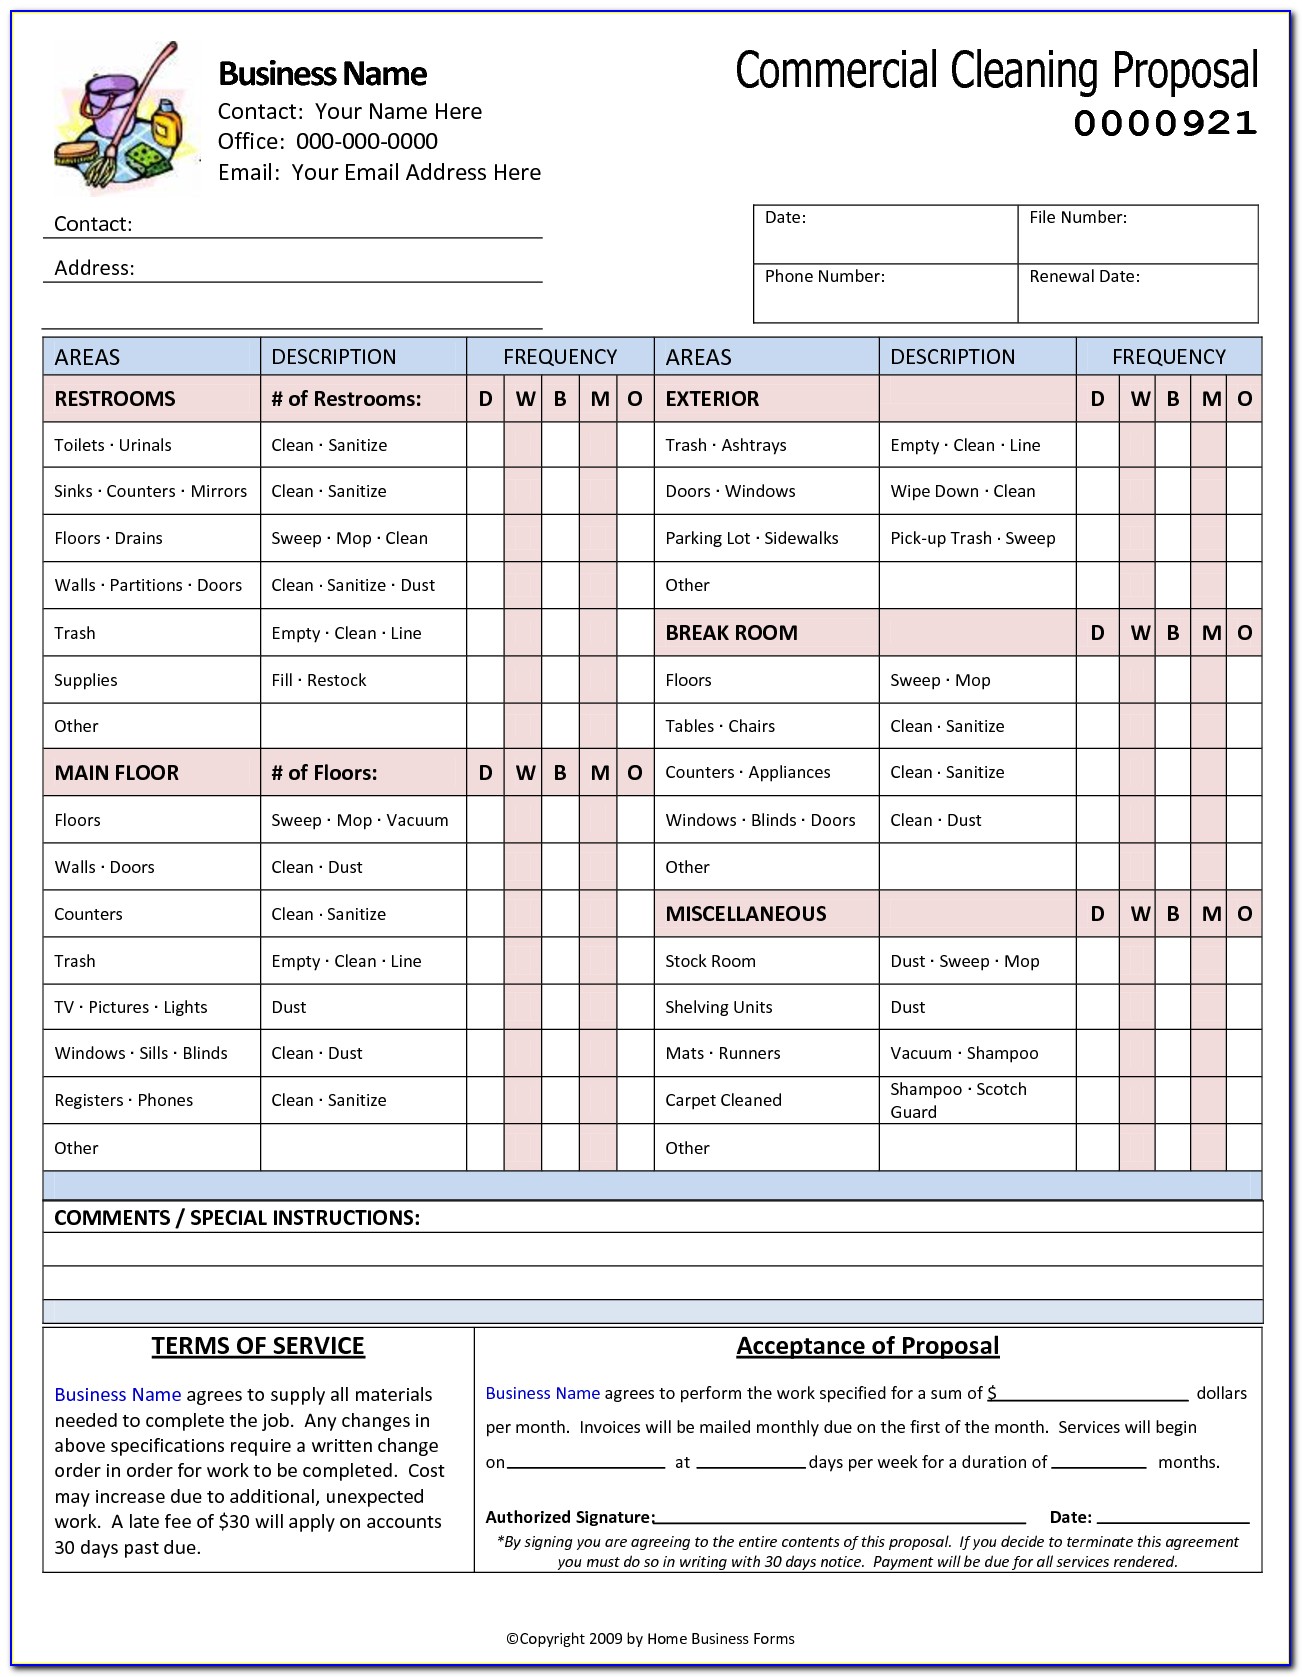 Commercial Cleaning Estimate Template